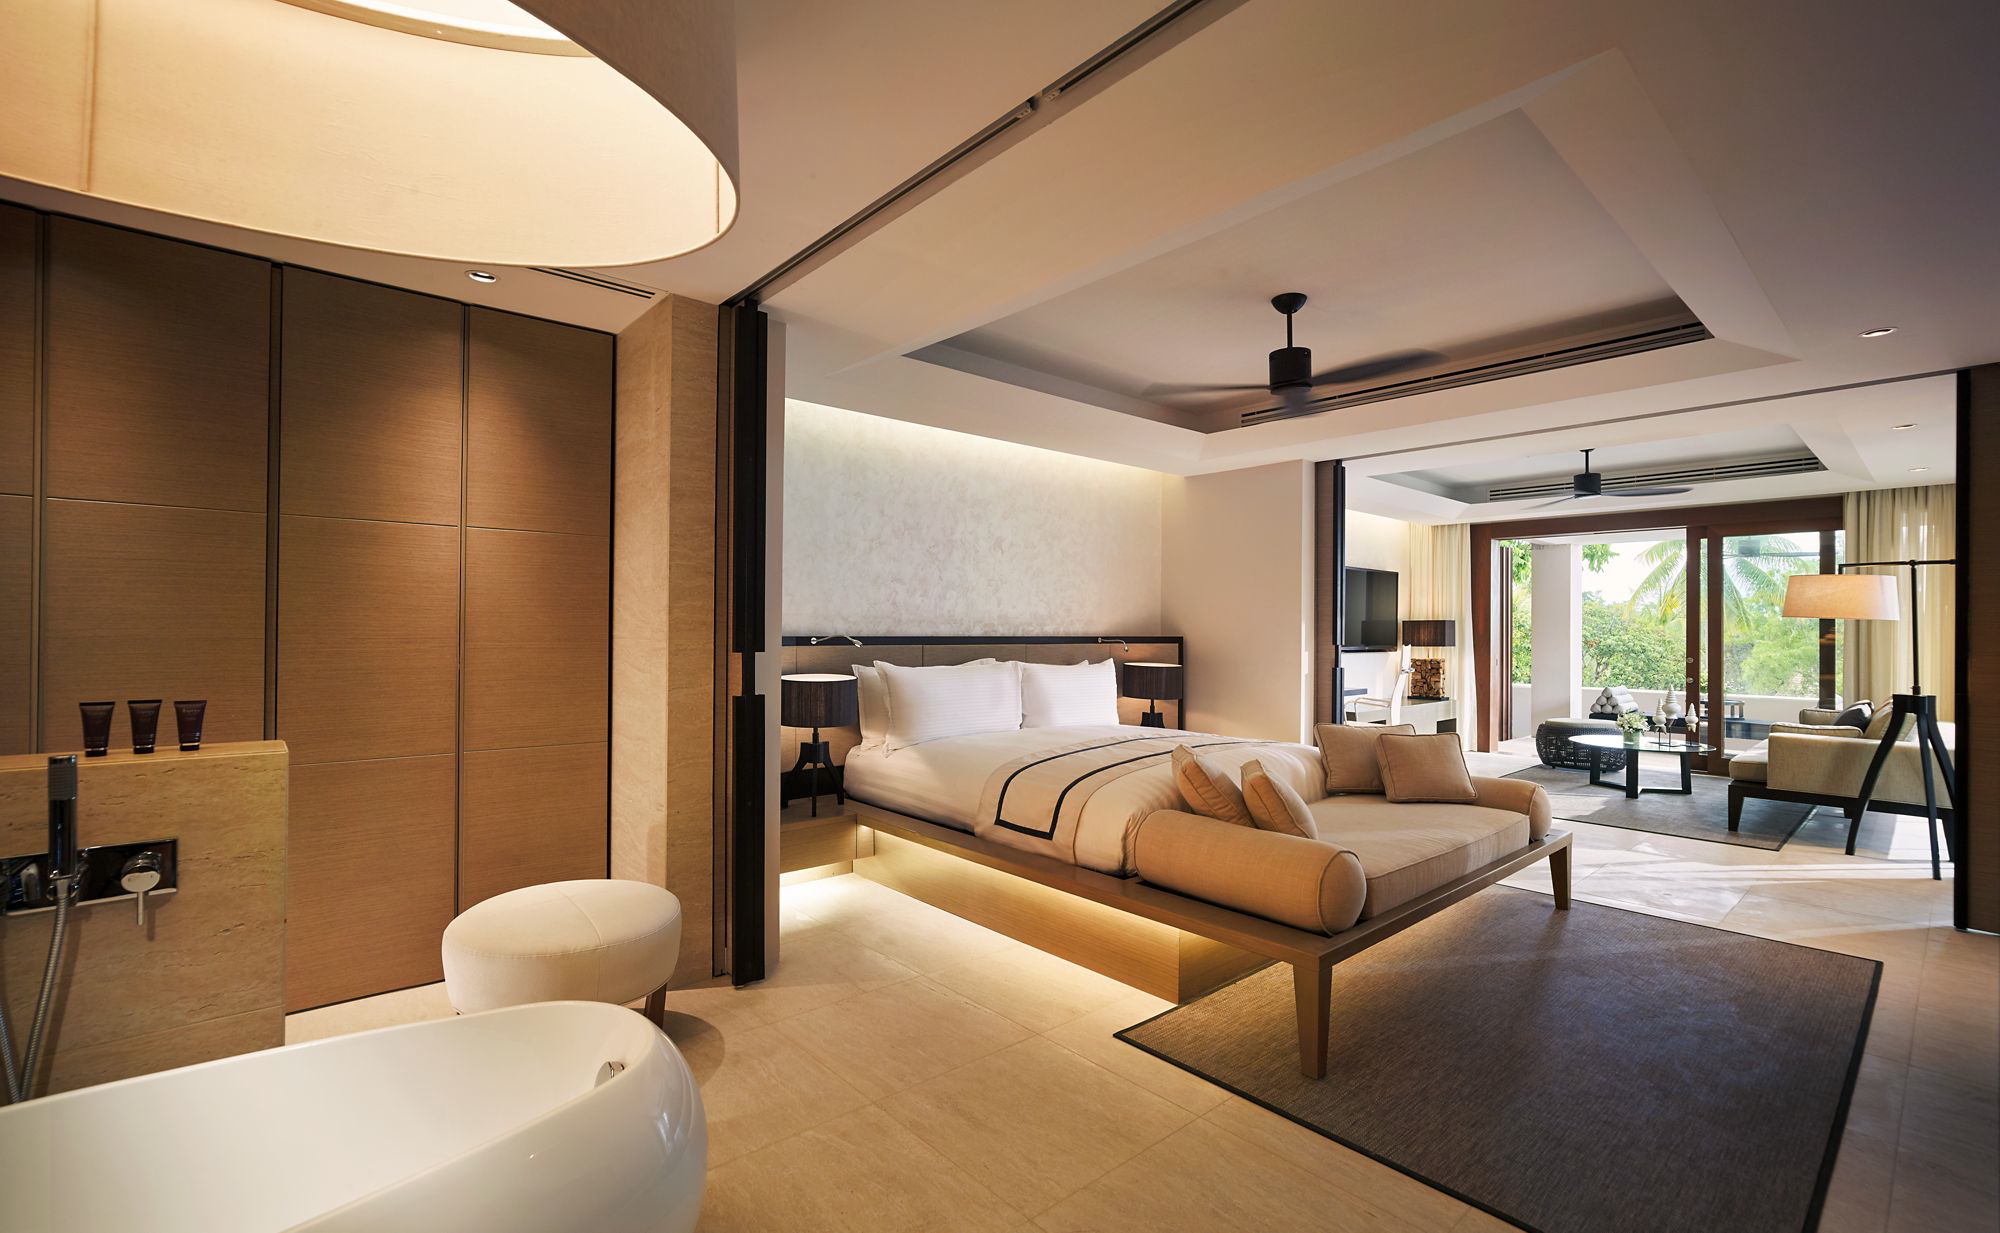 Picture of a luxurious 93 sqm Ocean View Suite at the newly opened Ritz-Carlton, Koh Samui in Thailand. Click to enlarge.